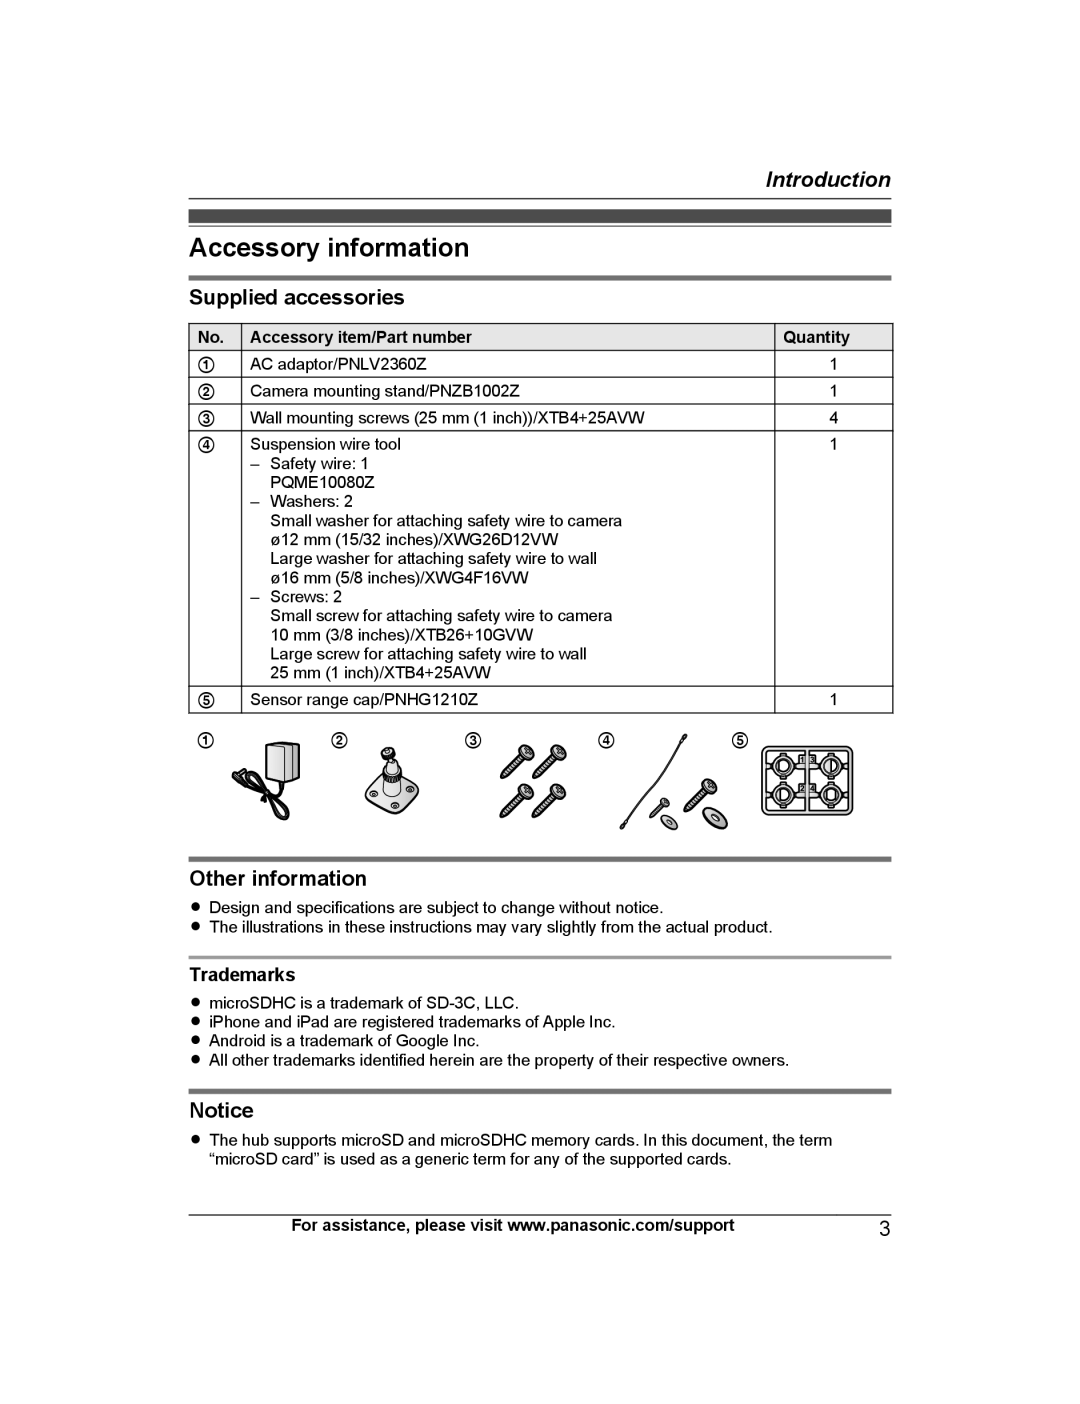 Panasonic KX-HNC600 manual Accessory information, Introduction, Supplied accessories, Other information 